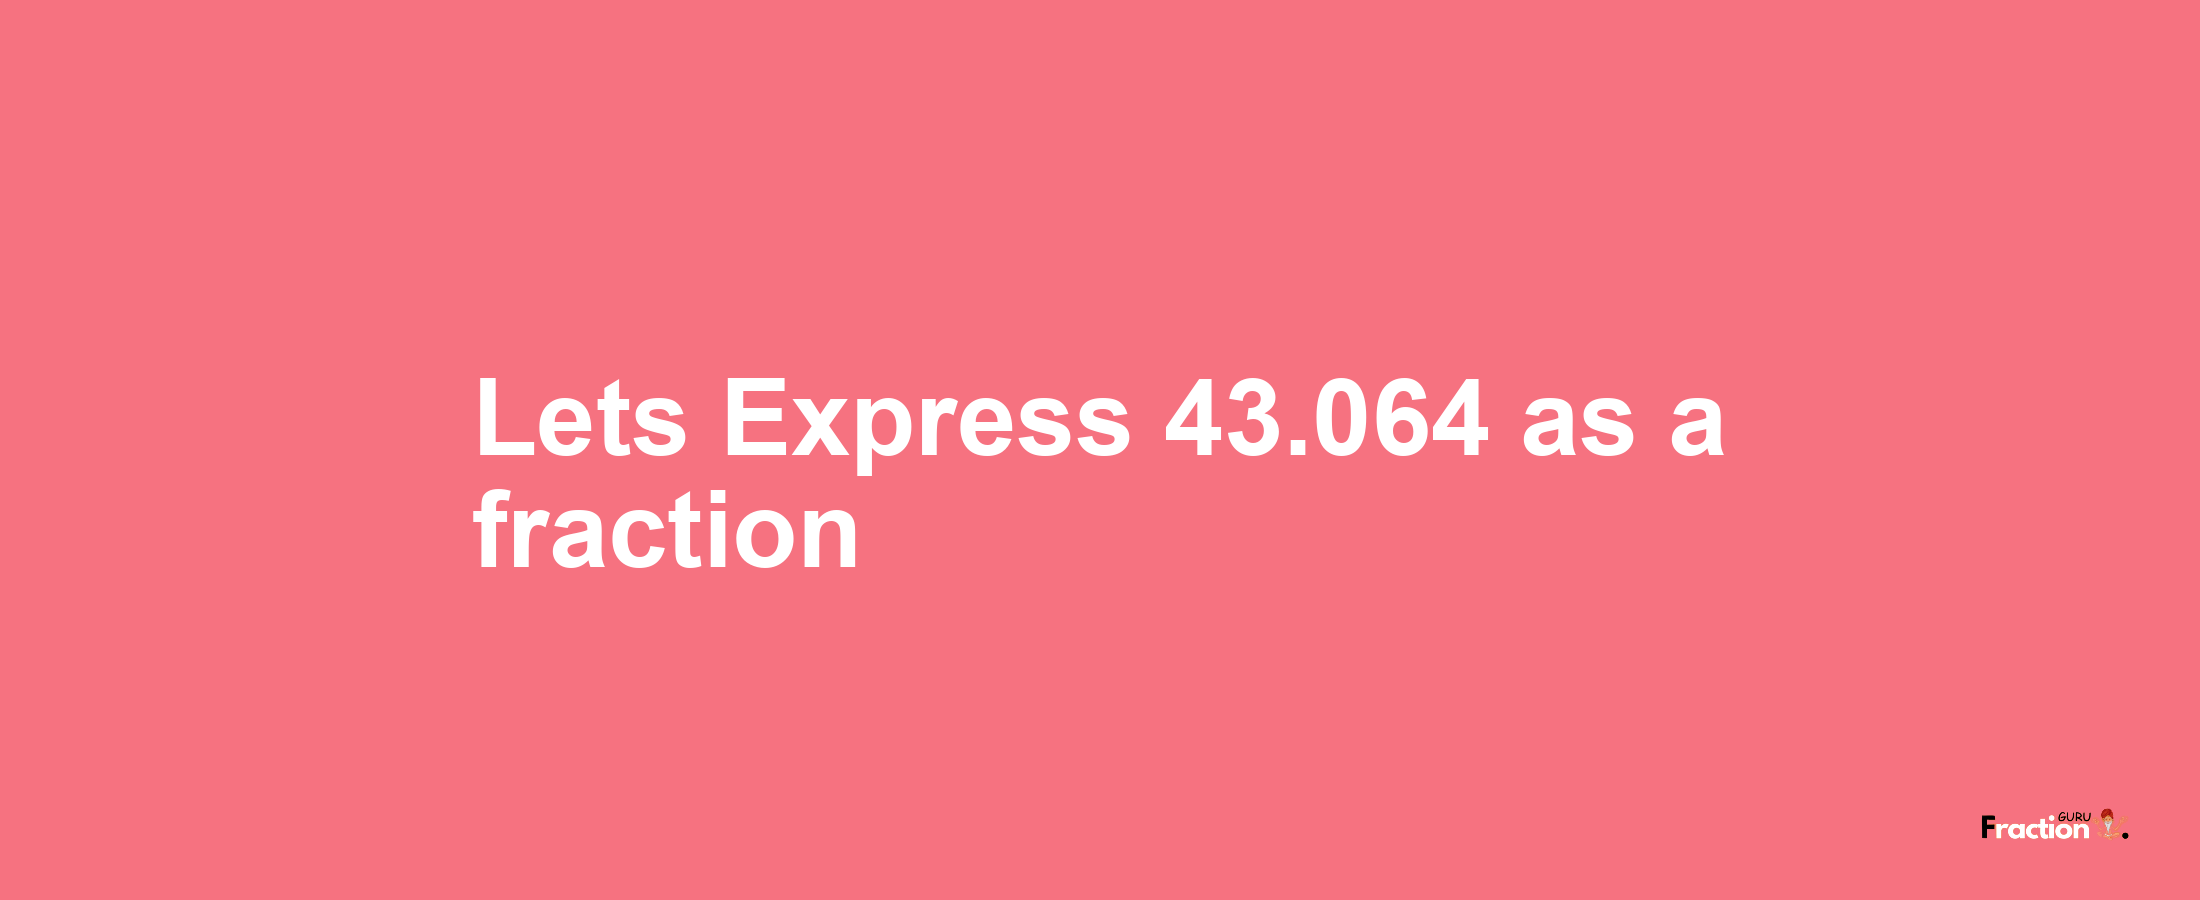 Lets Express 43.064 as afraction